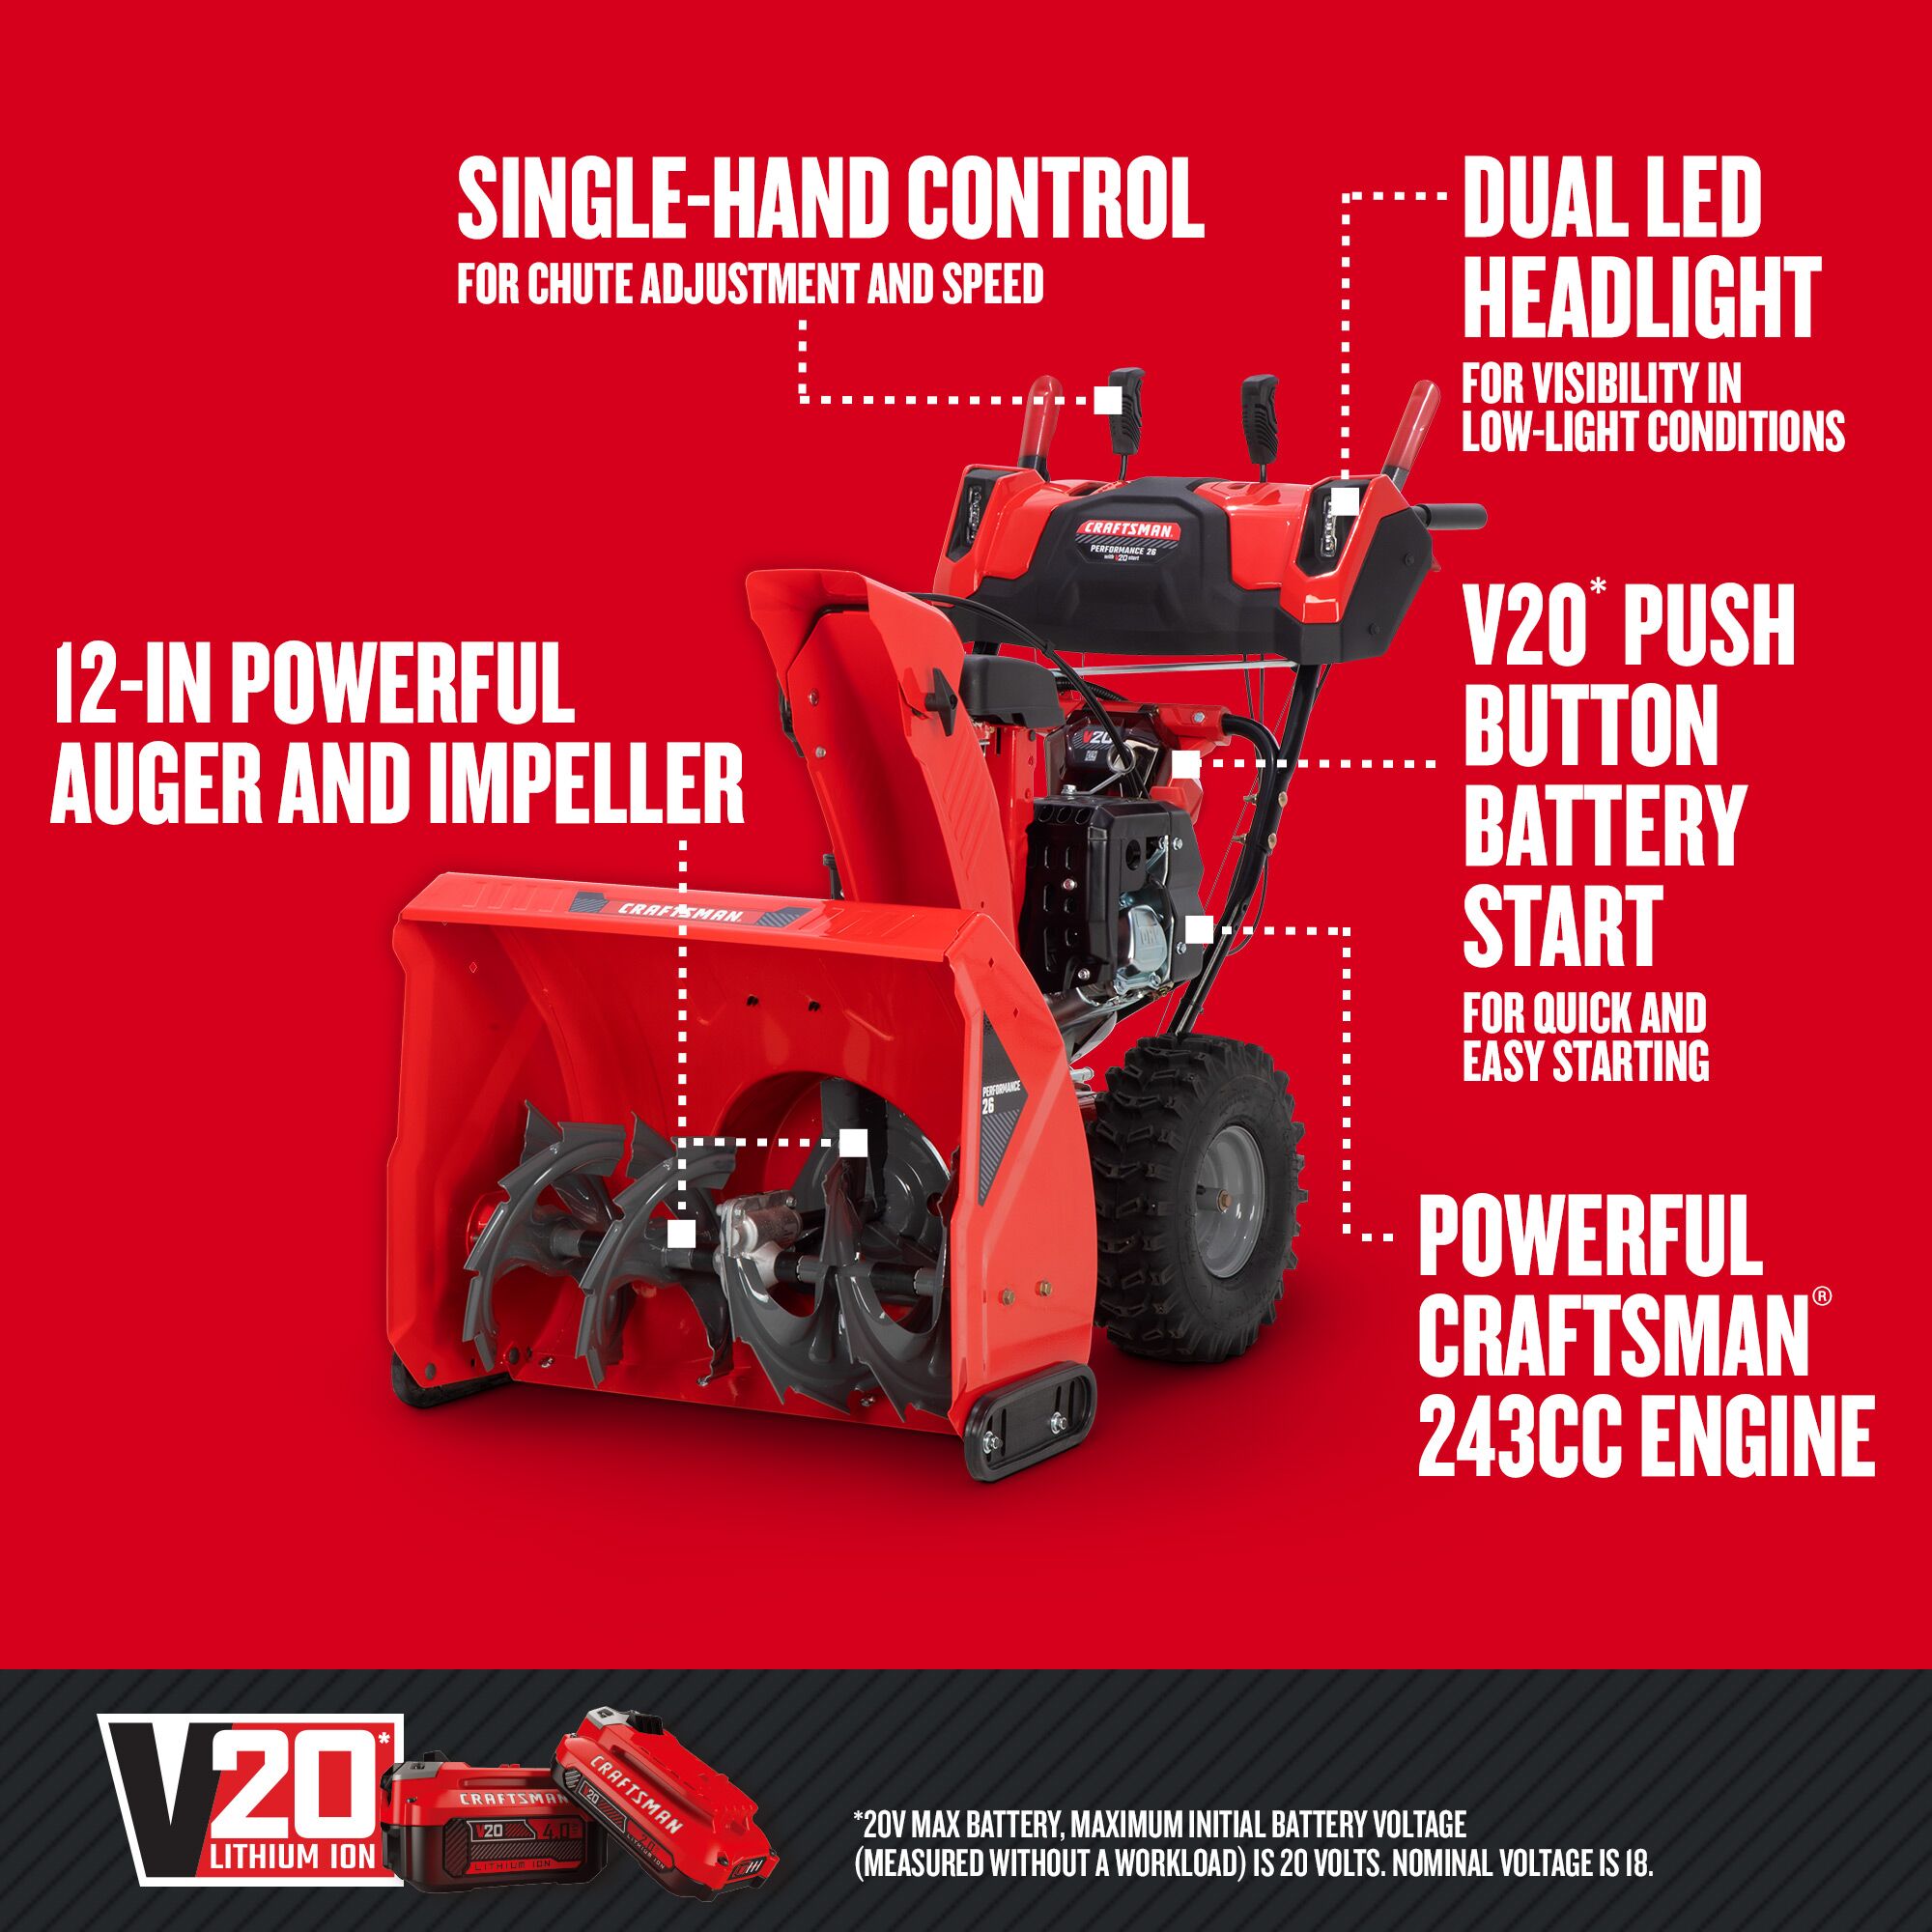 CRAFTSMAN V20* Start 26-in. 243-cc Two Stage Gas Snow Blower graphic highlighting key features